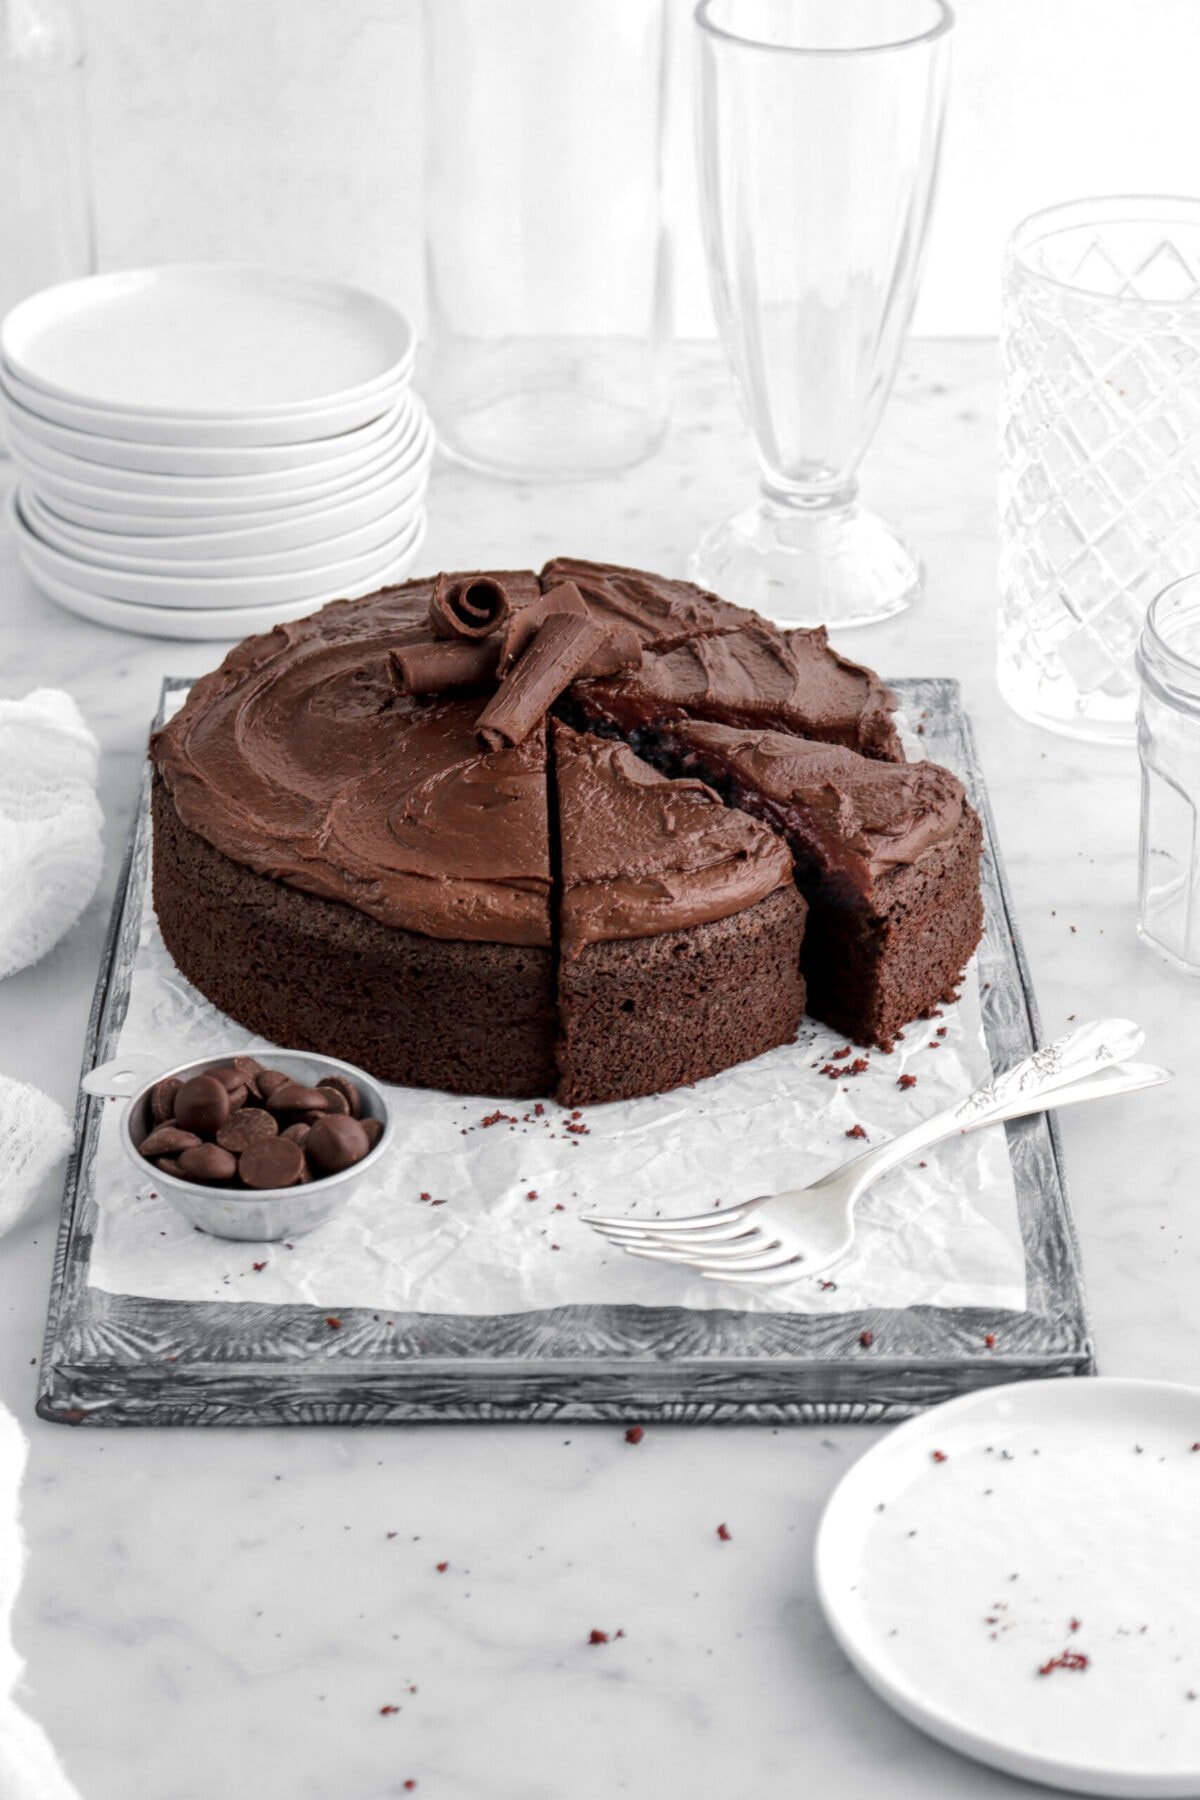 chocolate fudge cake with four slices cut into it with frosting and chocolate curls on top with bowl of chocolate chips and a fork in front of cake on lined sheet pan with plate in front and empty glasses behind.